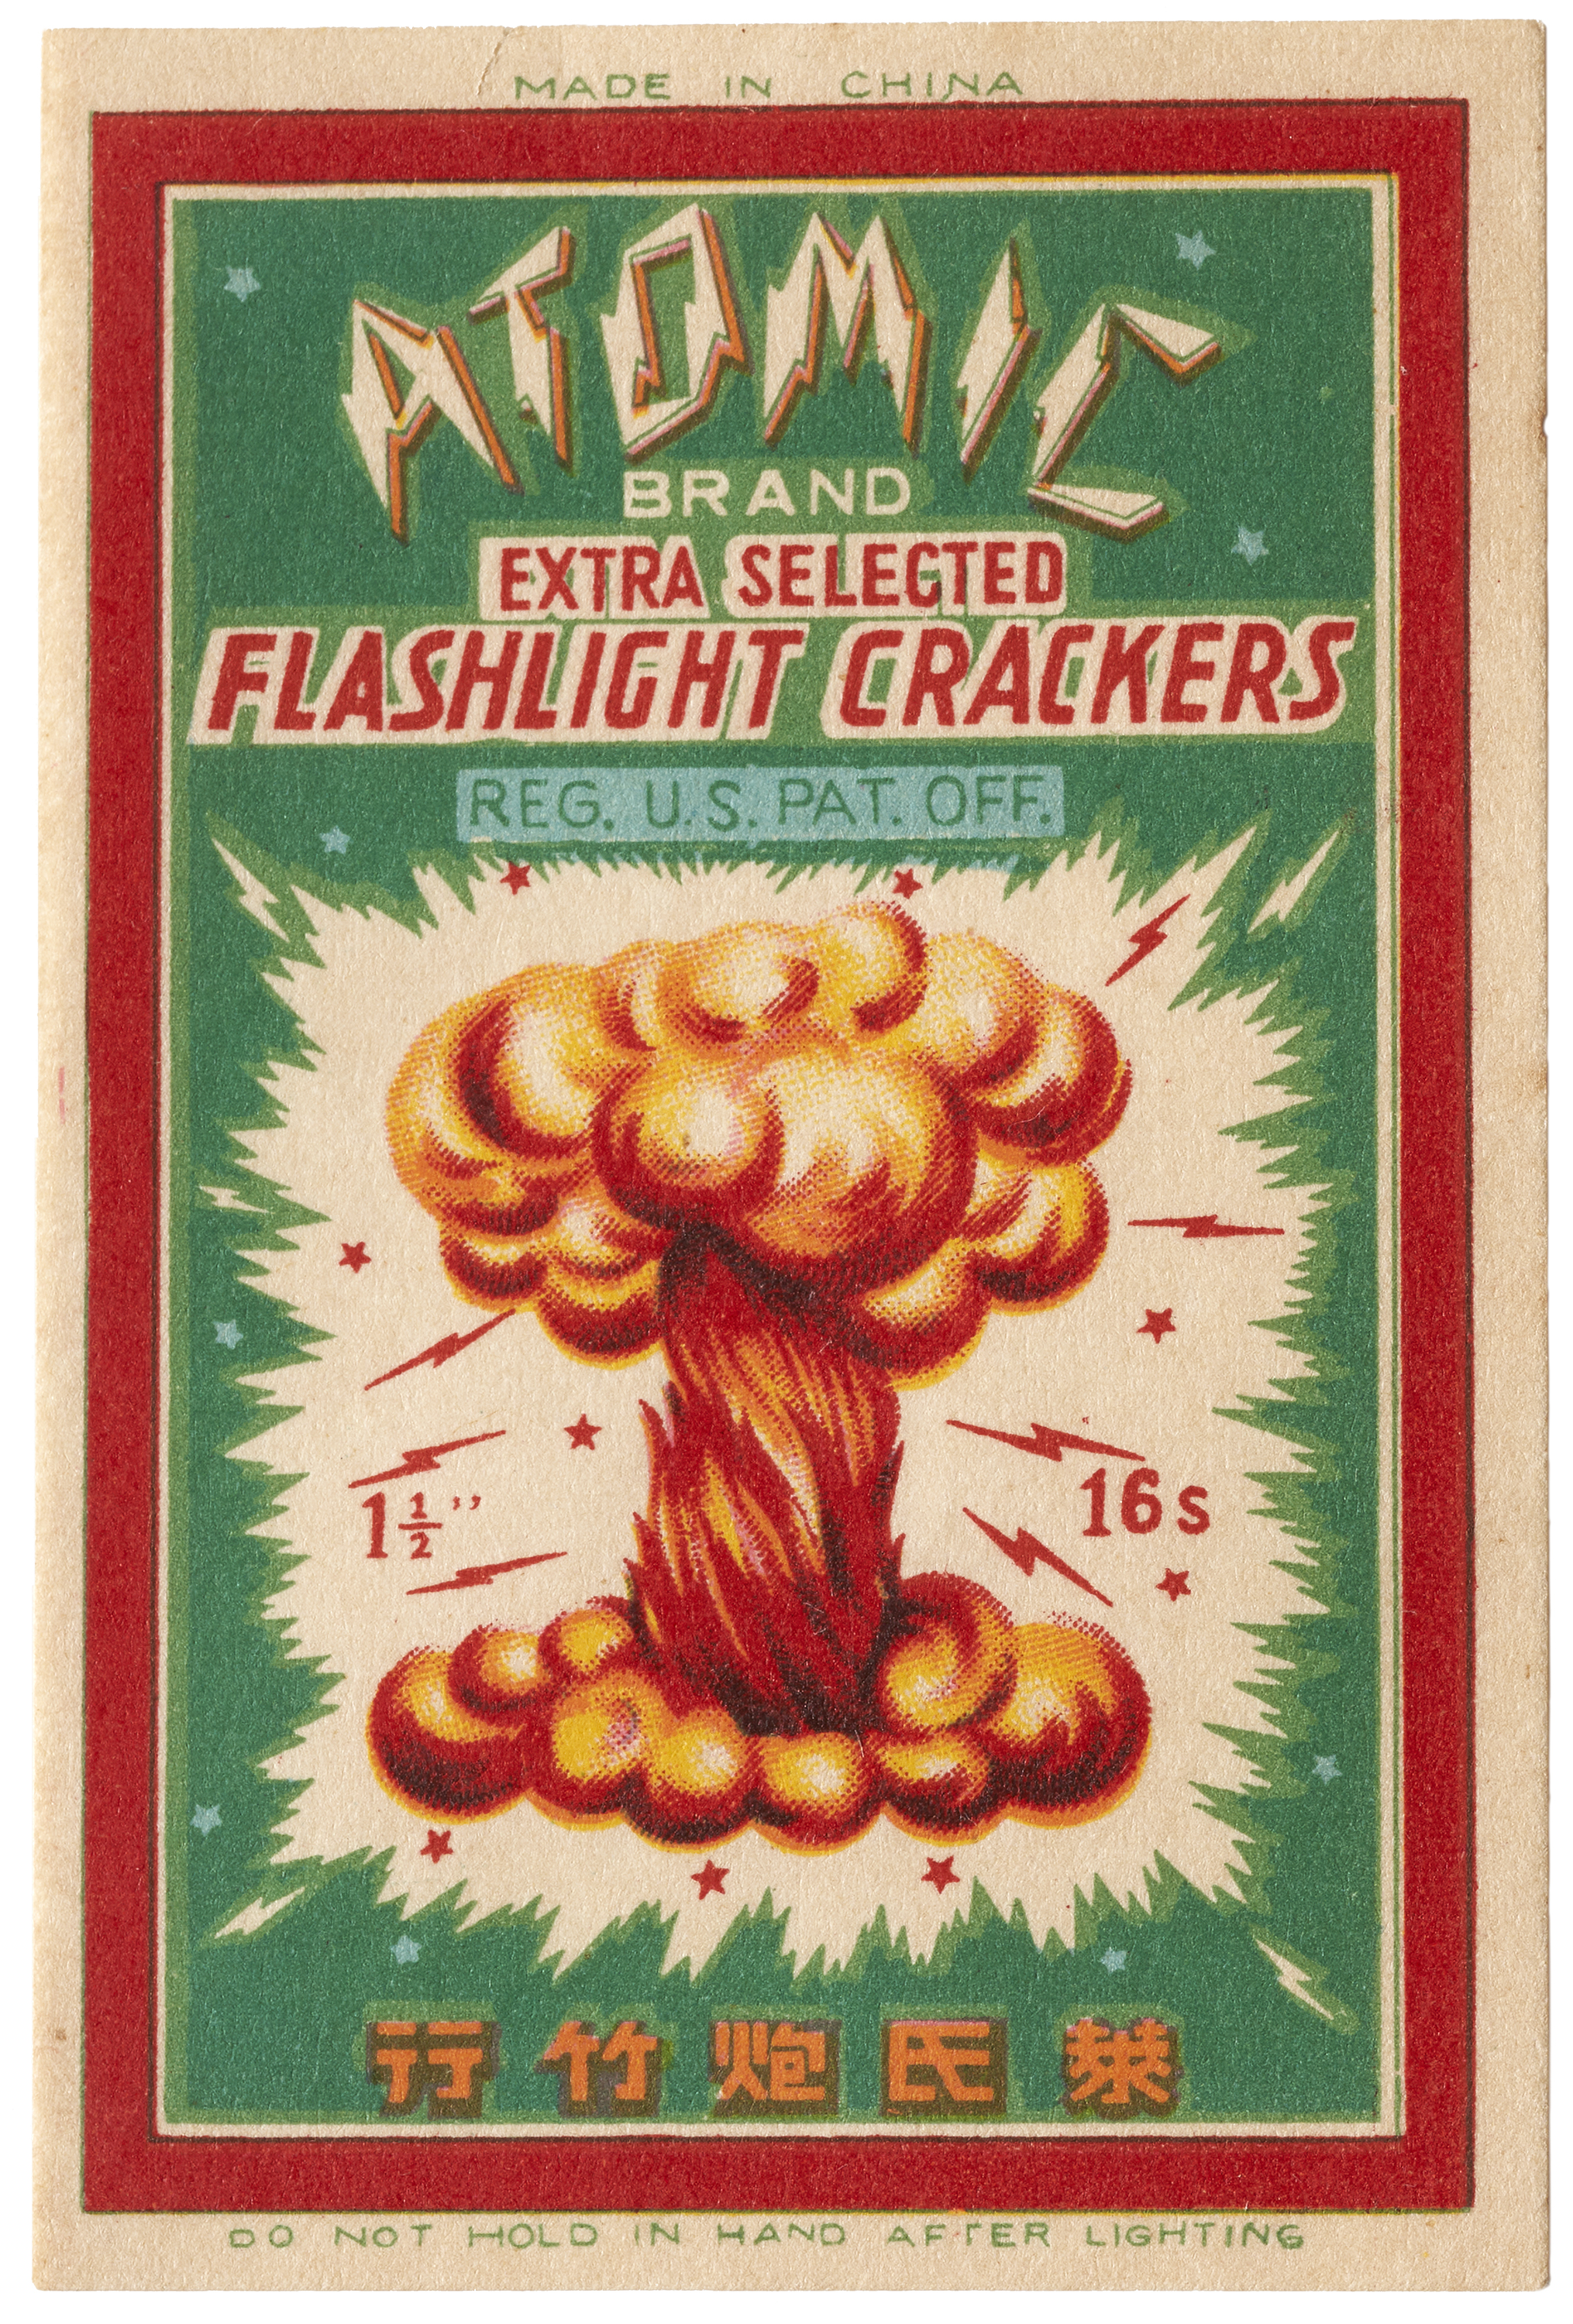 Label for Atomic brand fire crackers, China, 1930–1950